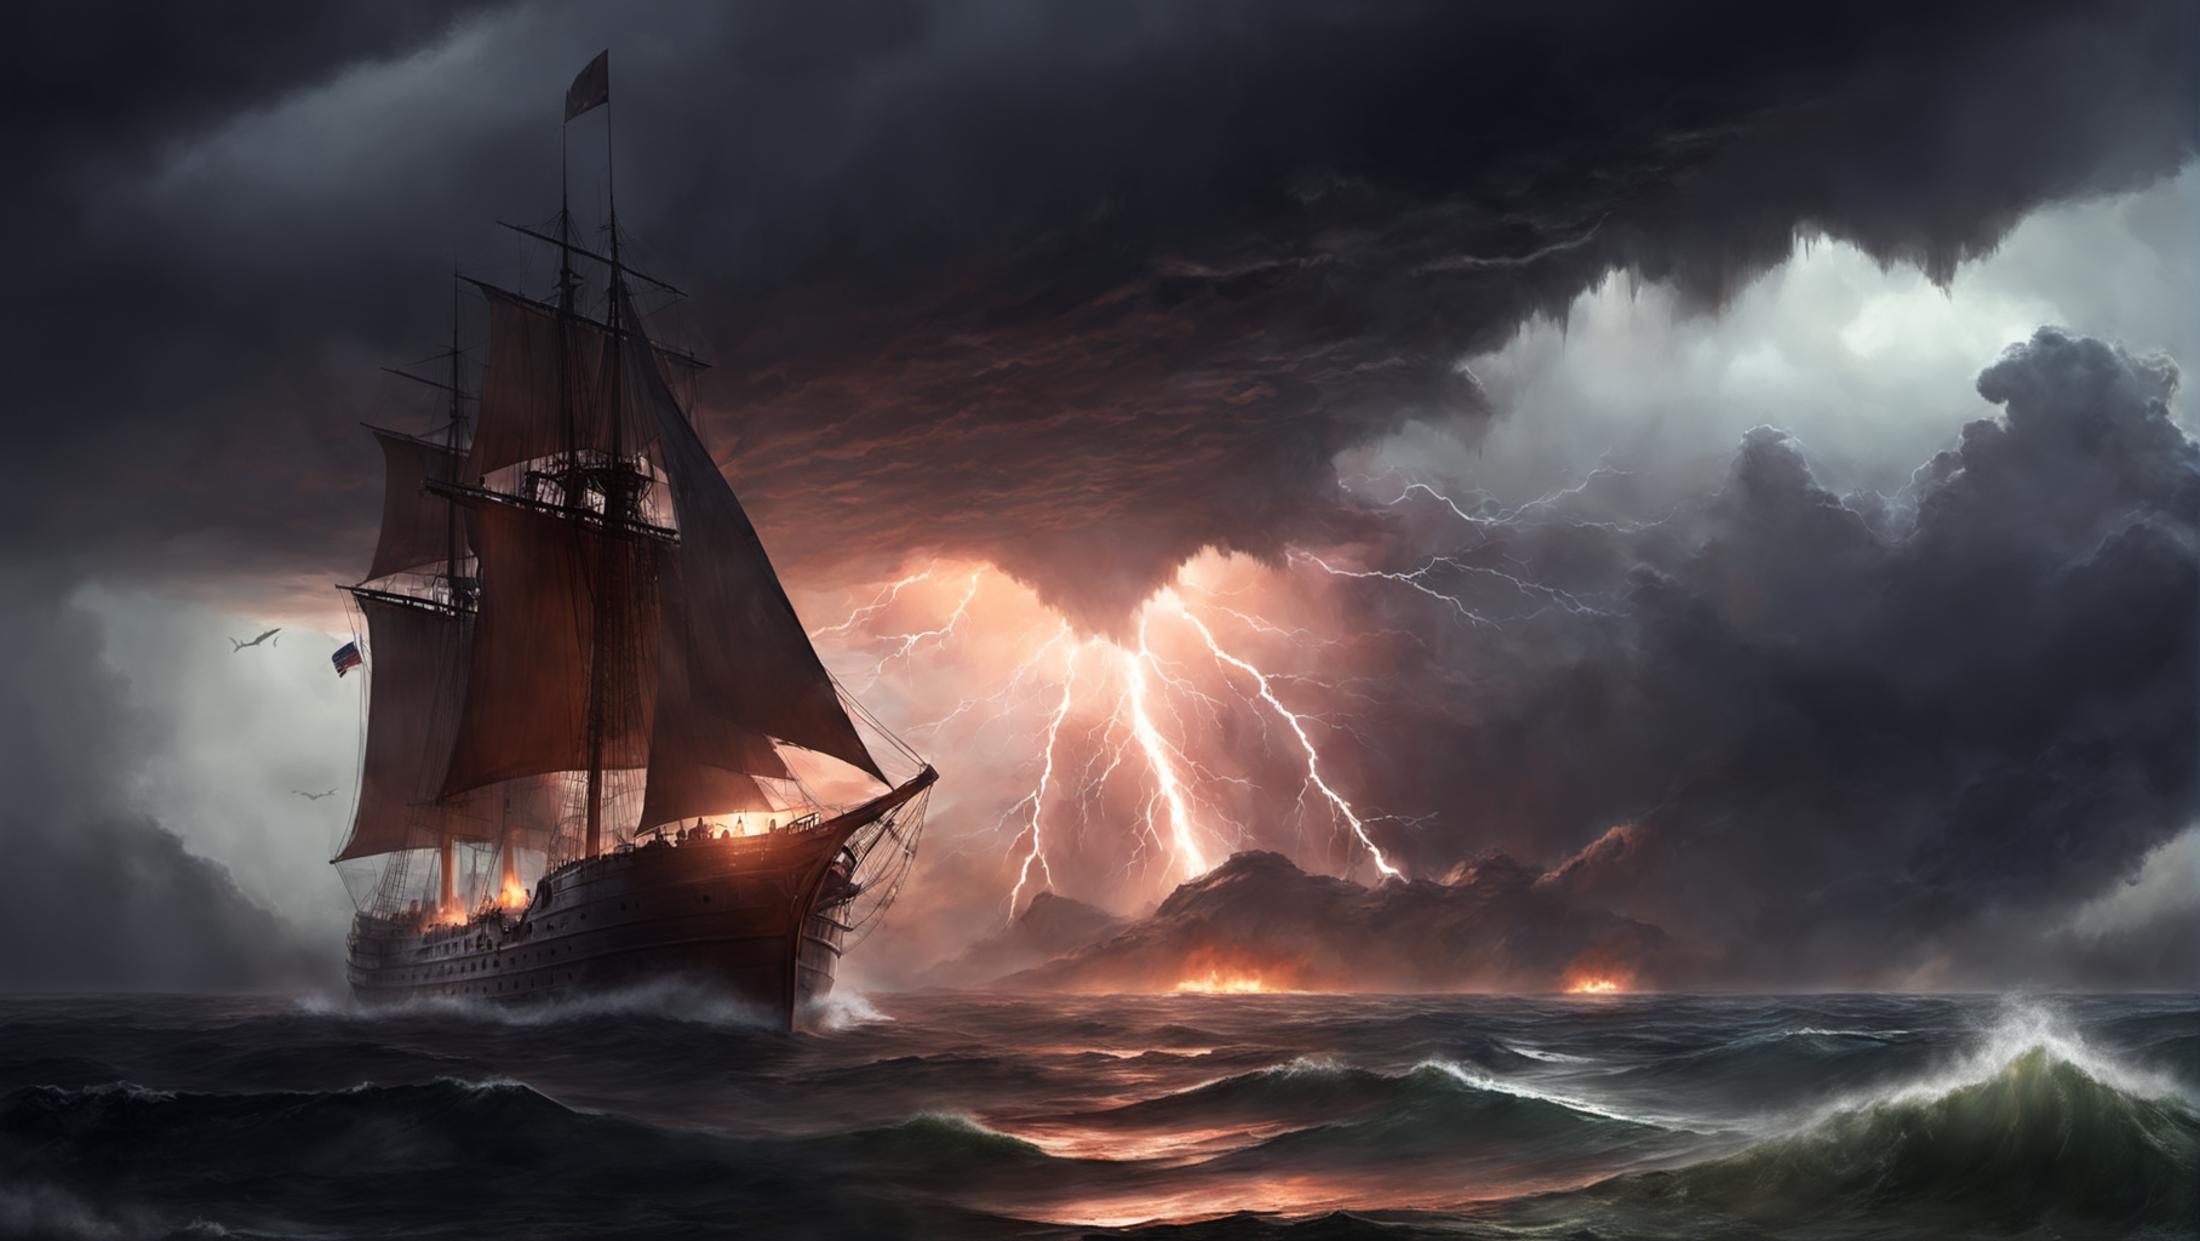 A large ship sailing through rough seas with lightning in the background.